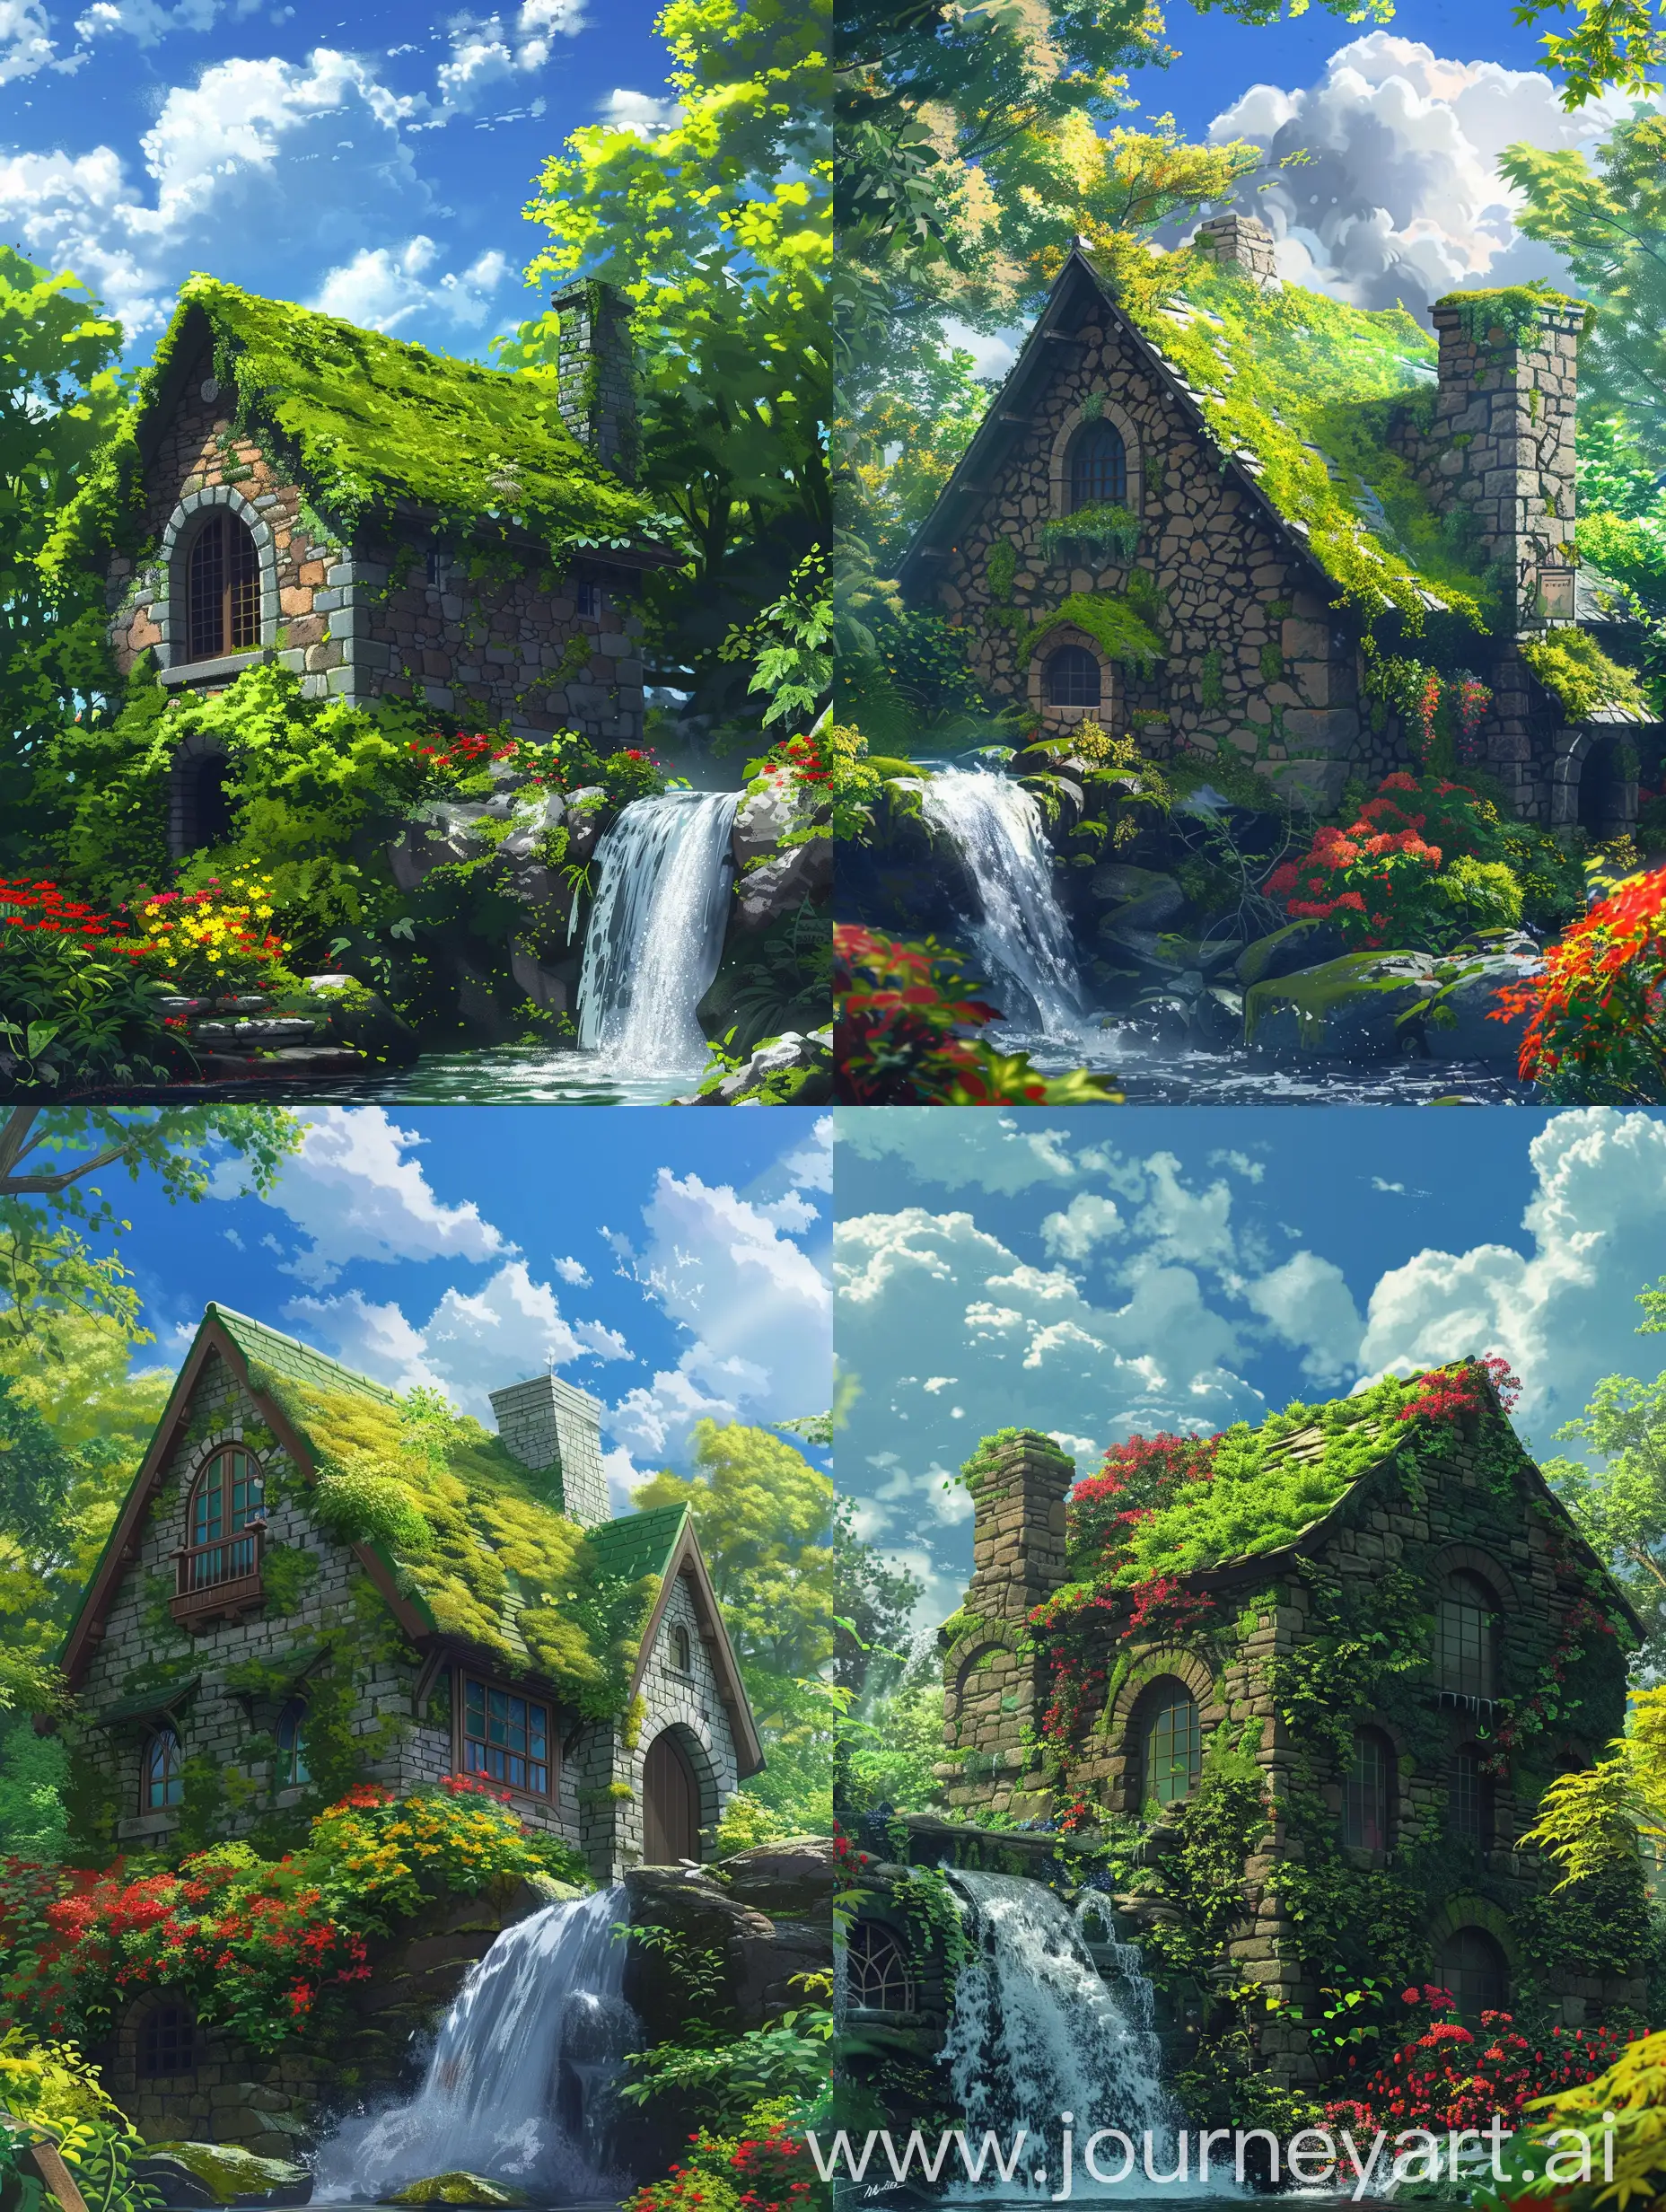 Tranquil-Anime-Style-Cottage-with-Mossy-Roof-and-Cascading-Waterfall